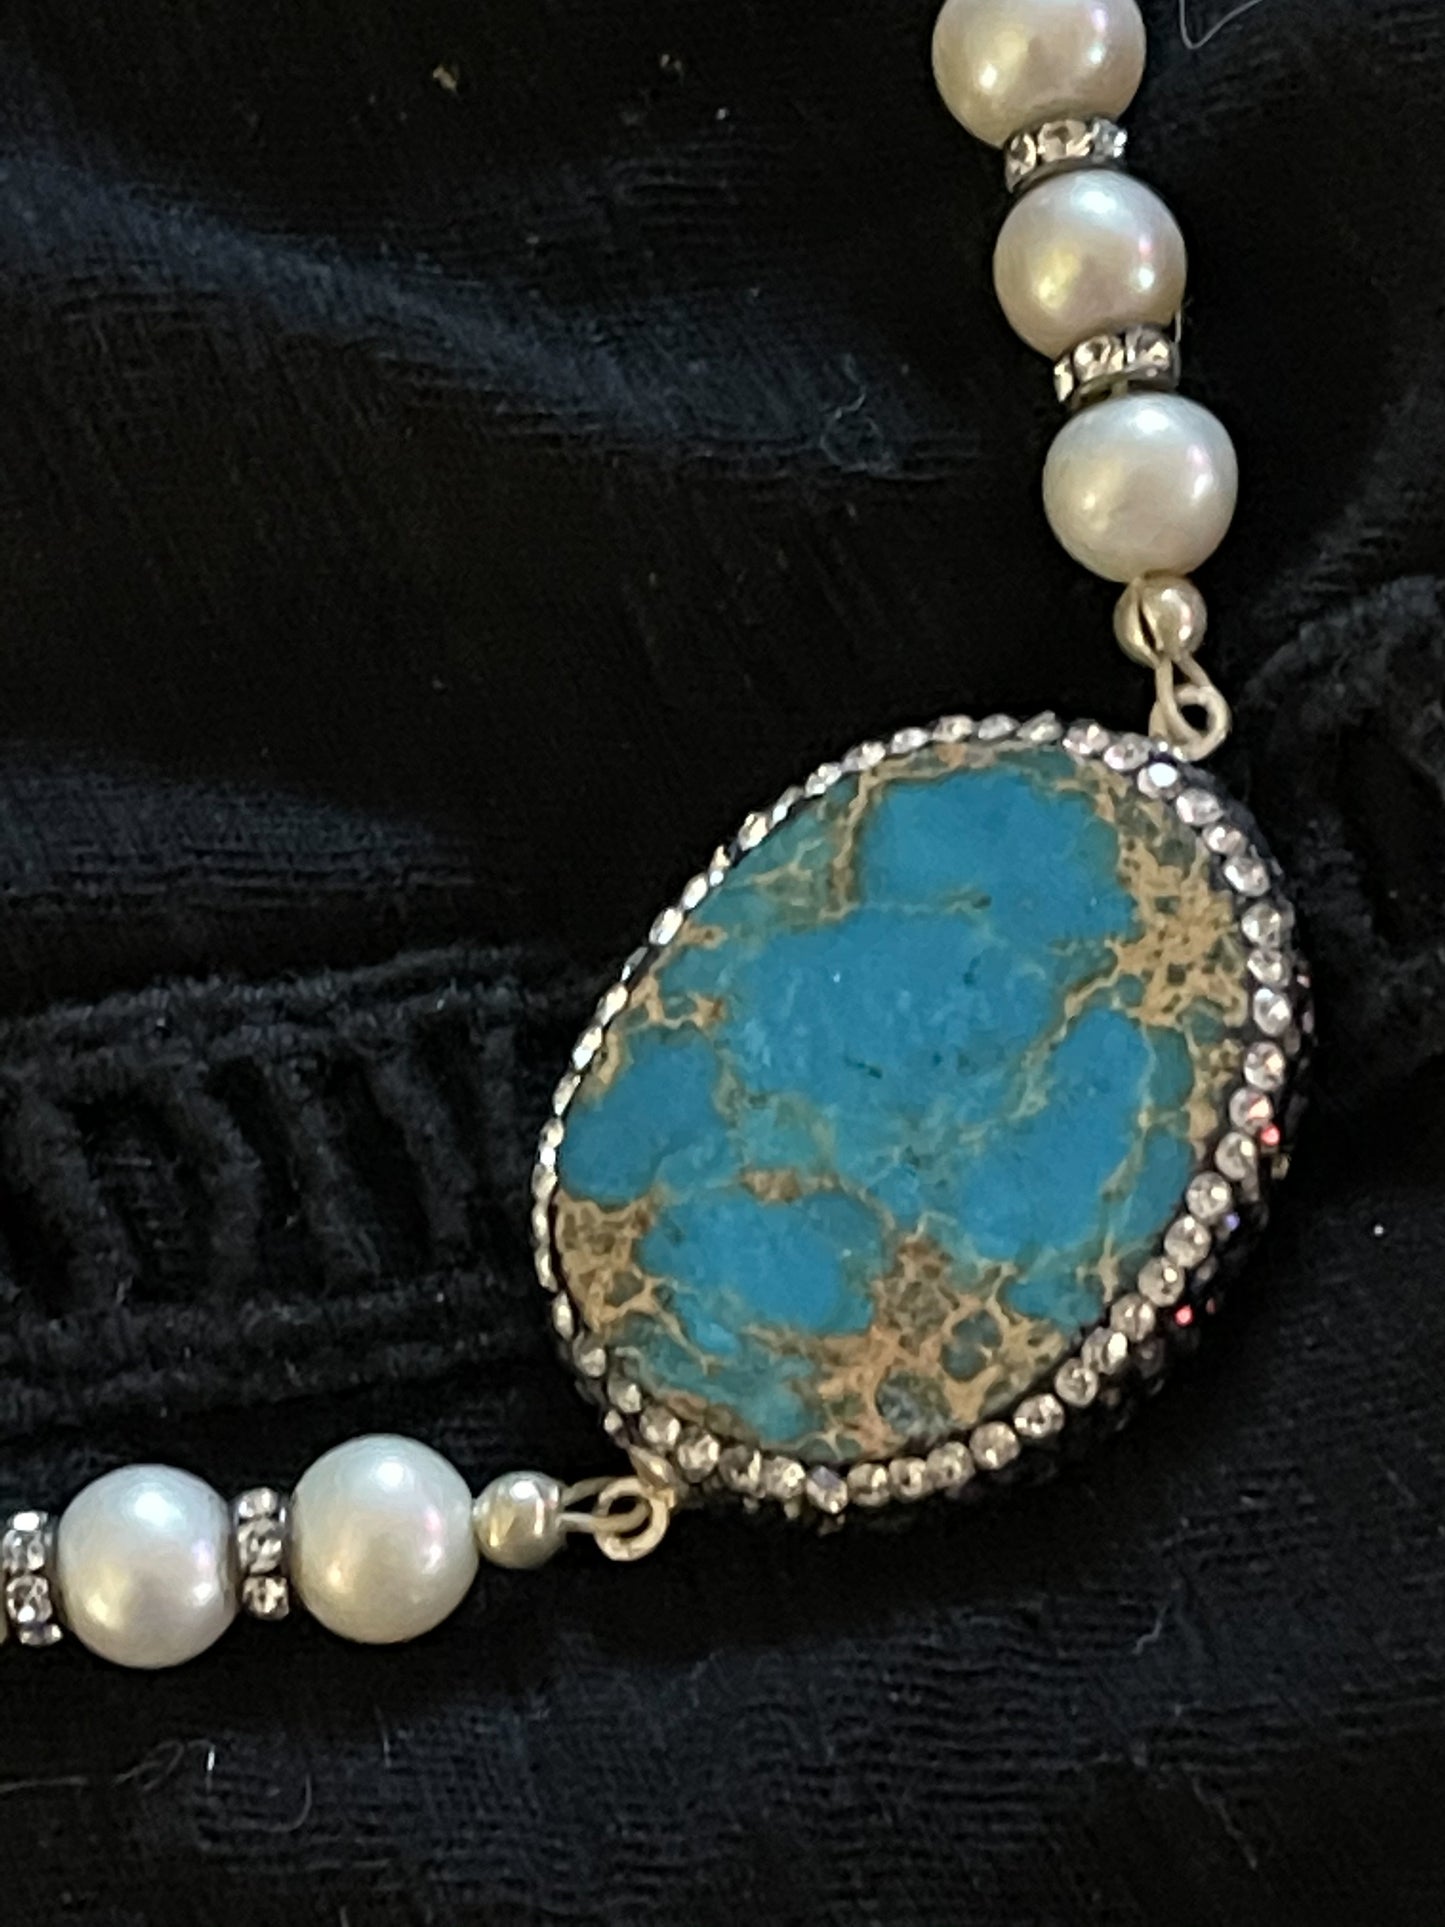 Pearl, Swarovski Crystal and Turquoise necklace